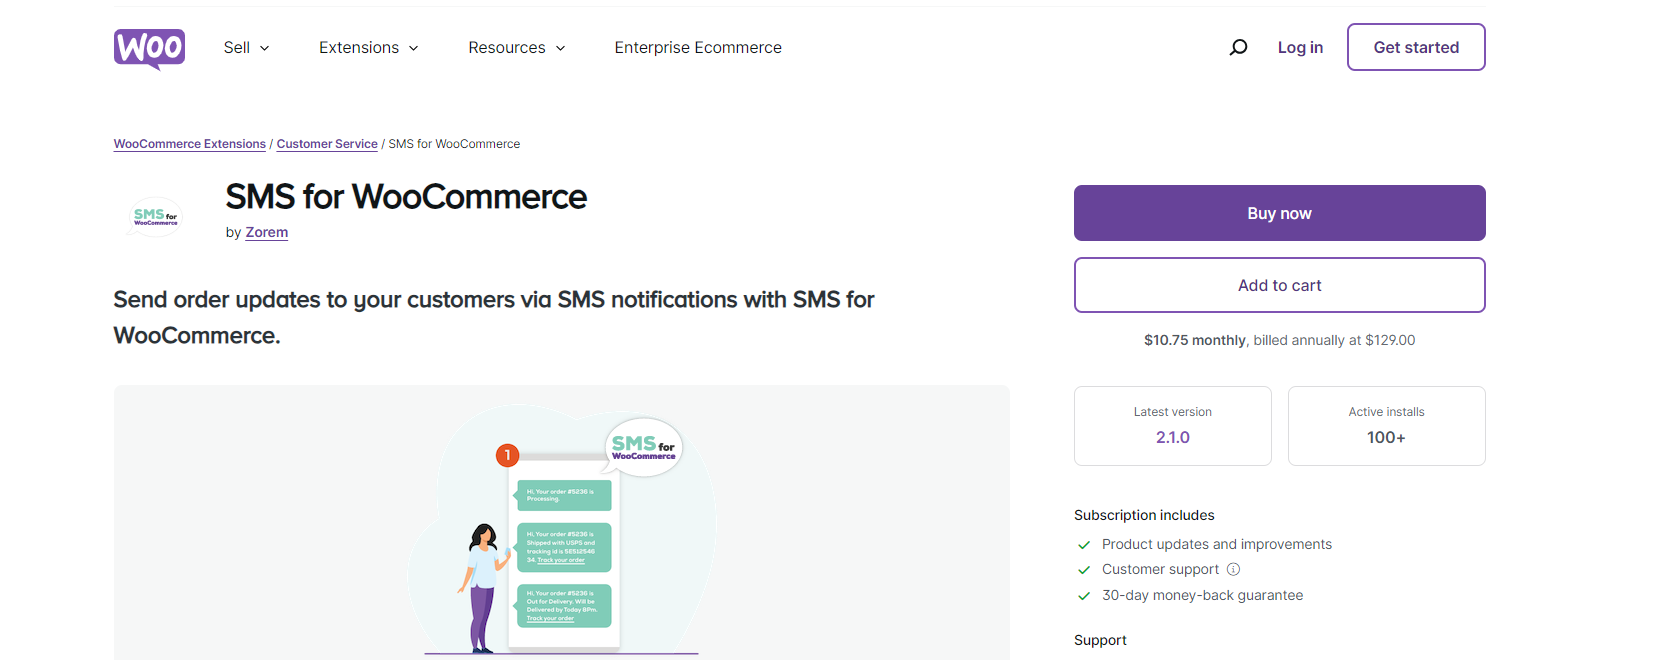 SMS for WooCommerce